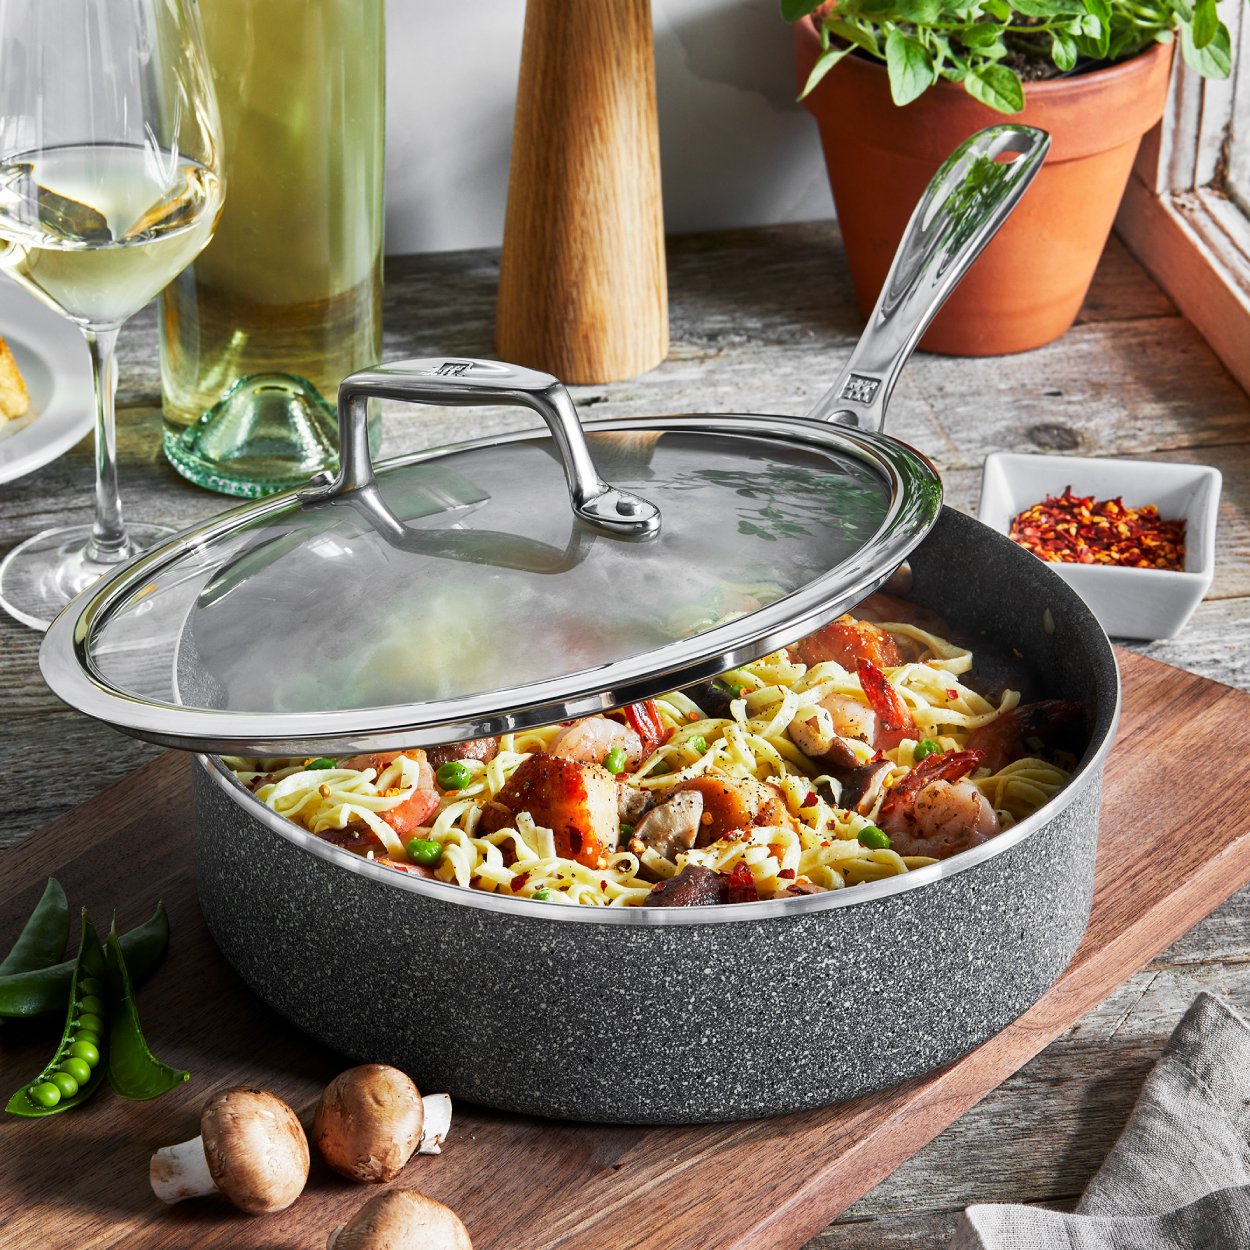 https://www.zwilling.com/on/demandware.static/-/Sites-zwilling-us-Library/default/dwa3a9a0ab/images/product-content/masonry-content/zwilling/cookware/vitale/ZW_VITALE_600-600_4.jpg